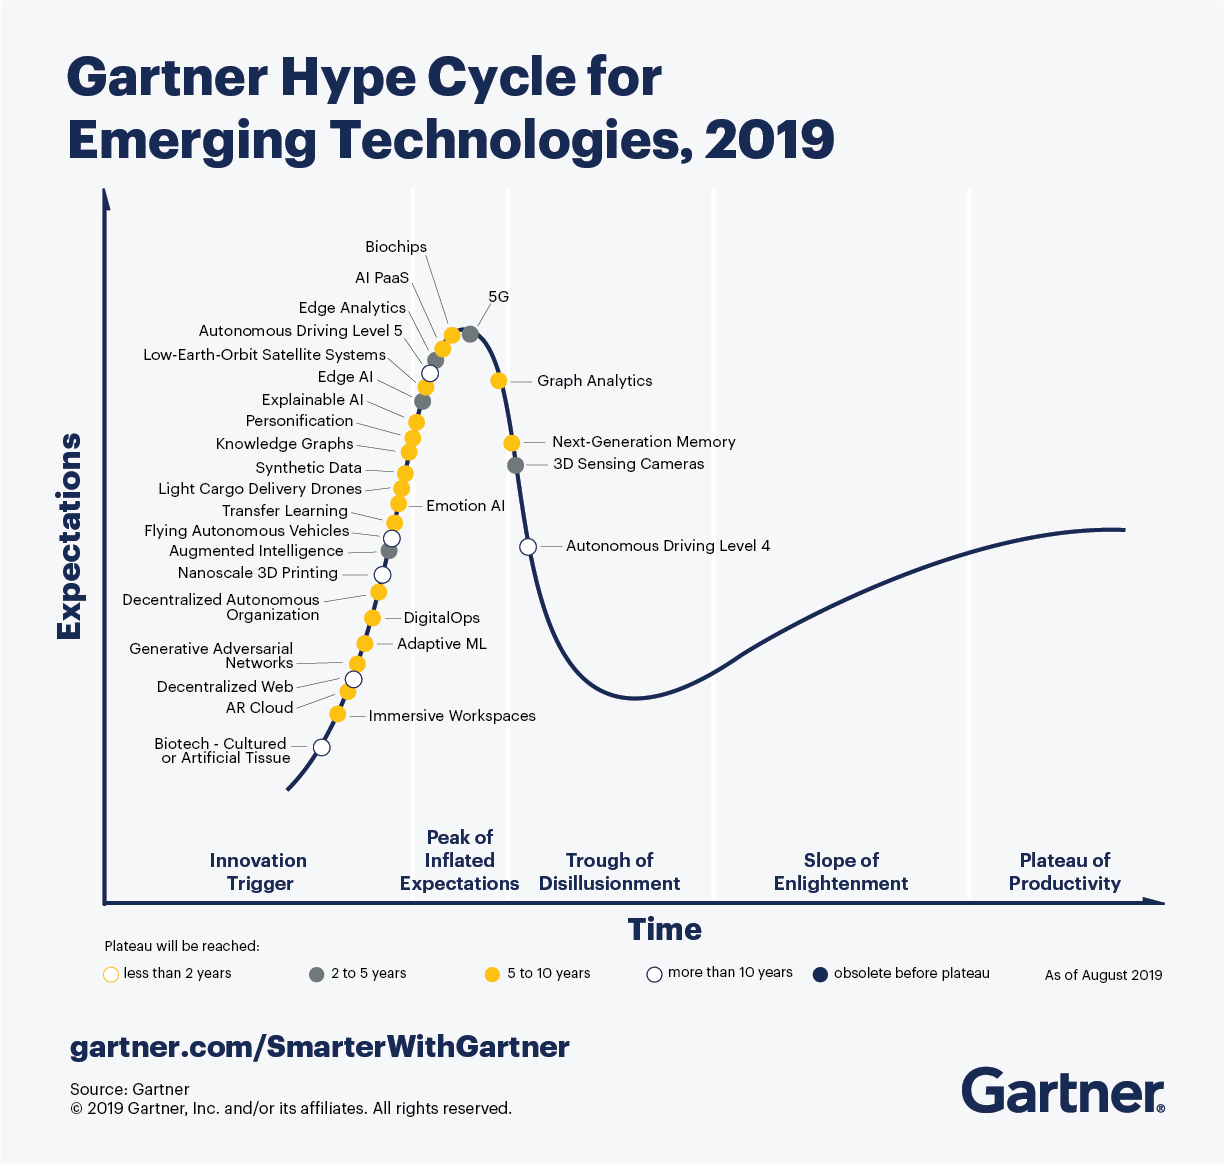 Hype Cycle for Emerging Technologies 2019